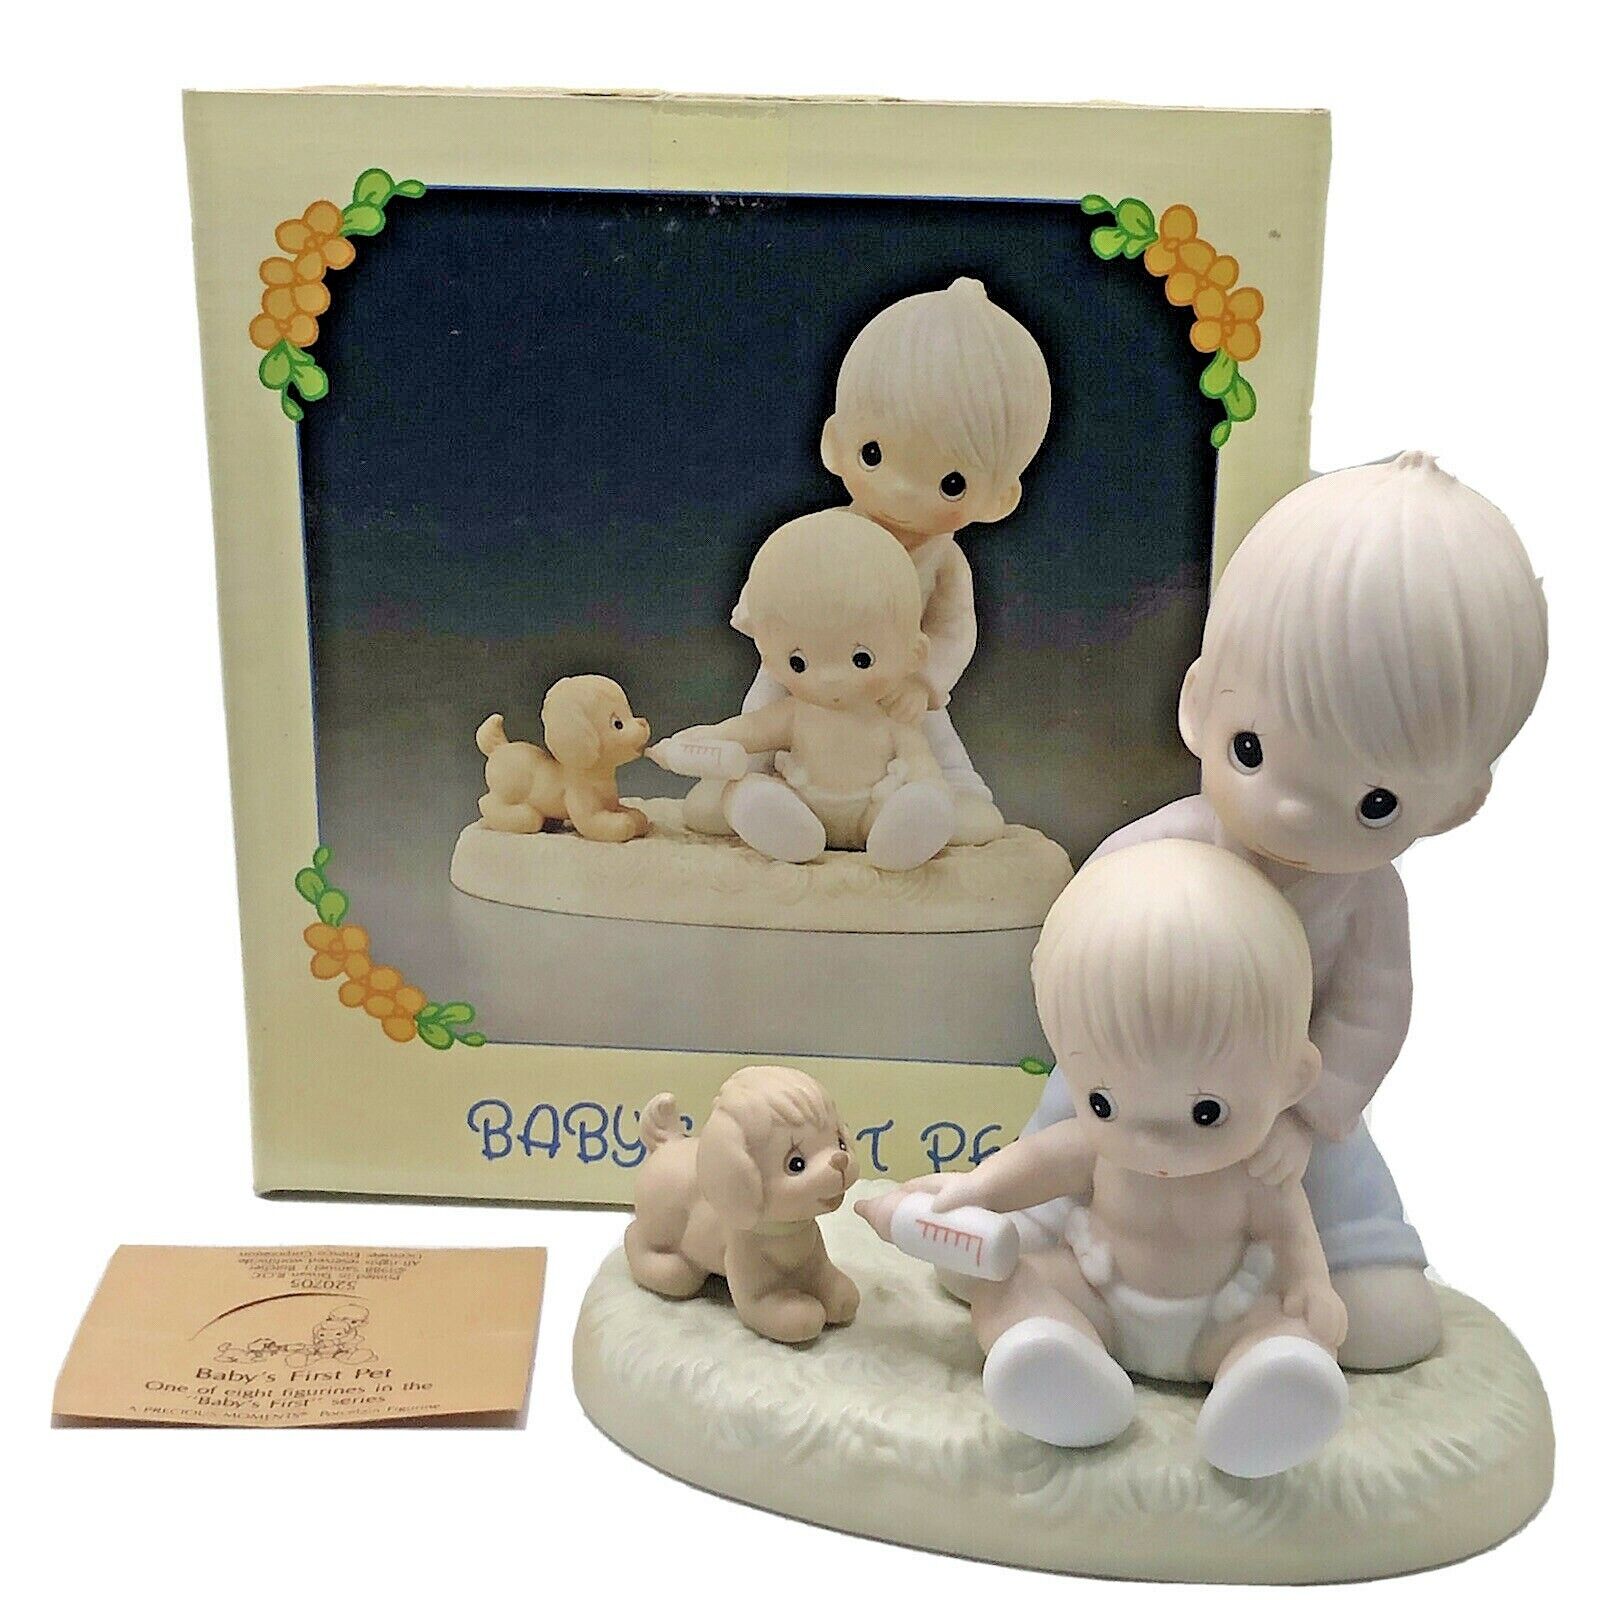 Pre-Owned Precious Moments Figurine 520705 Baby's First Pet w/ Box Tag 1988